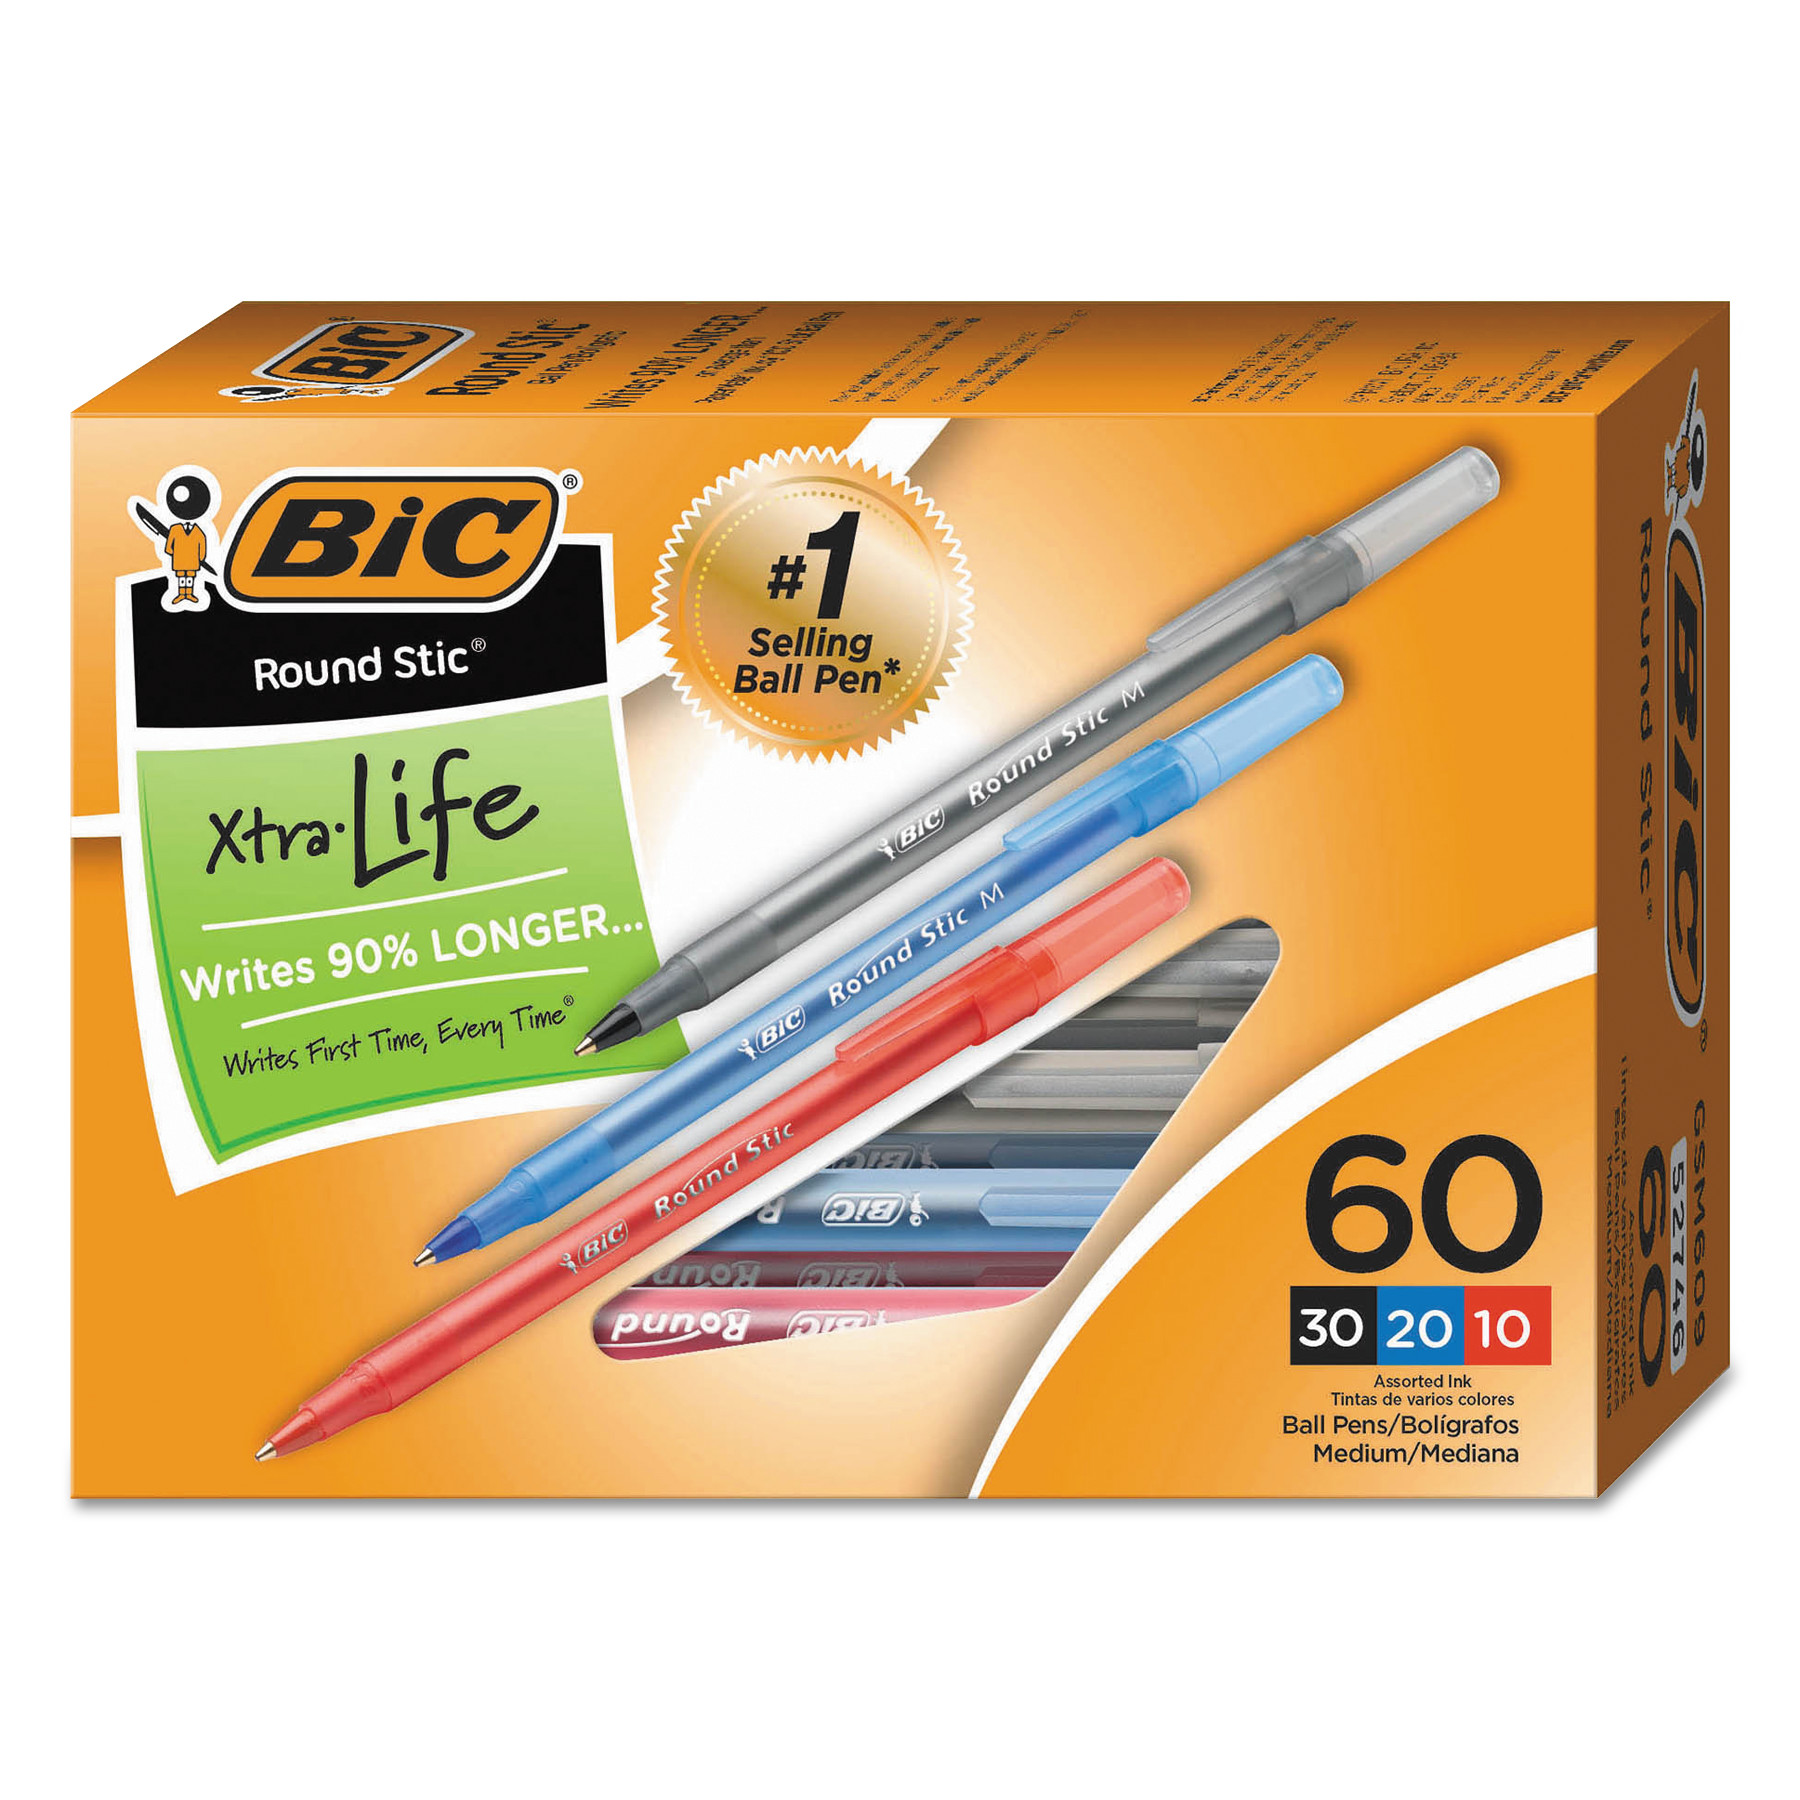 BIC Round Stic Xtra Life Ballpoint Pen, Medium Point (1.0mm), Assorted, 60-Count - image 1 of 10